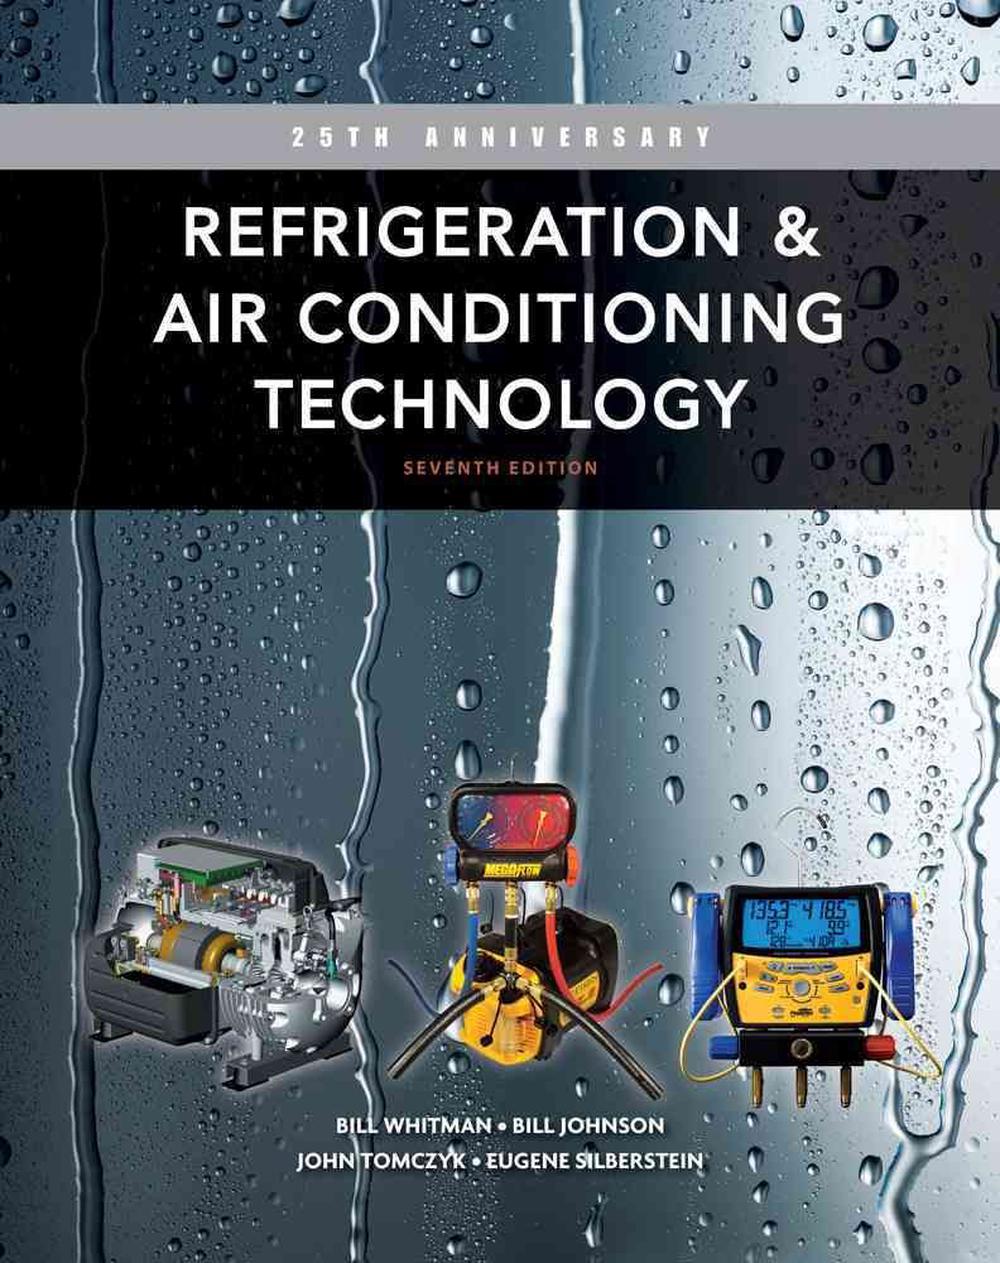 Refrigeration and Air Conditioning Technology by Bill Whitman, Hardcover, 9781111644475 Buy